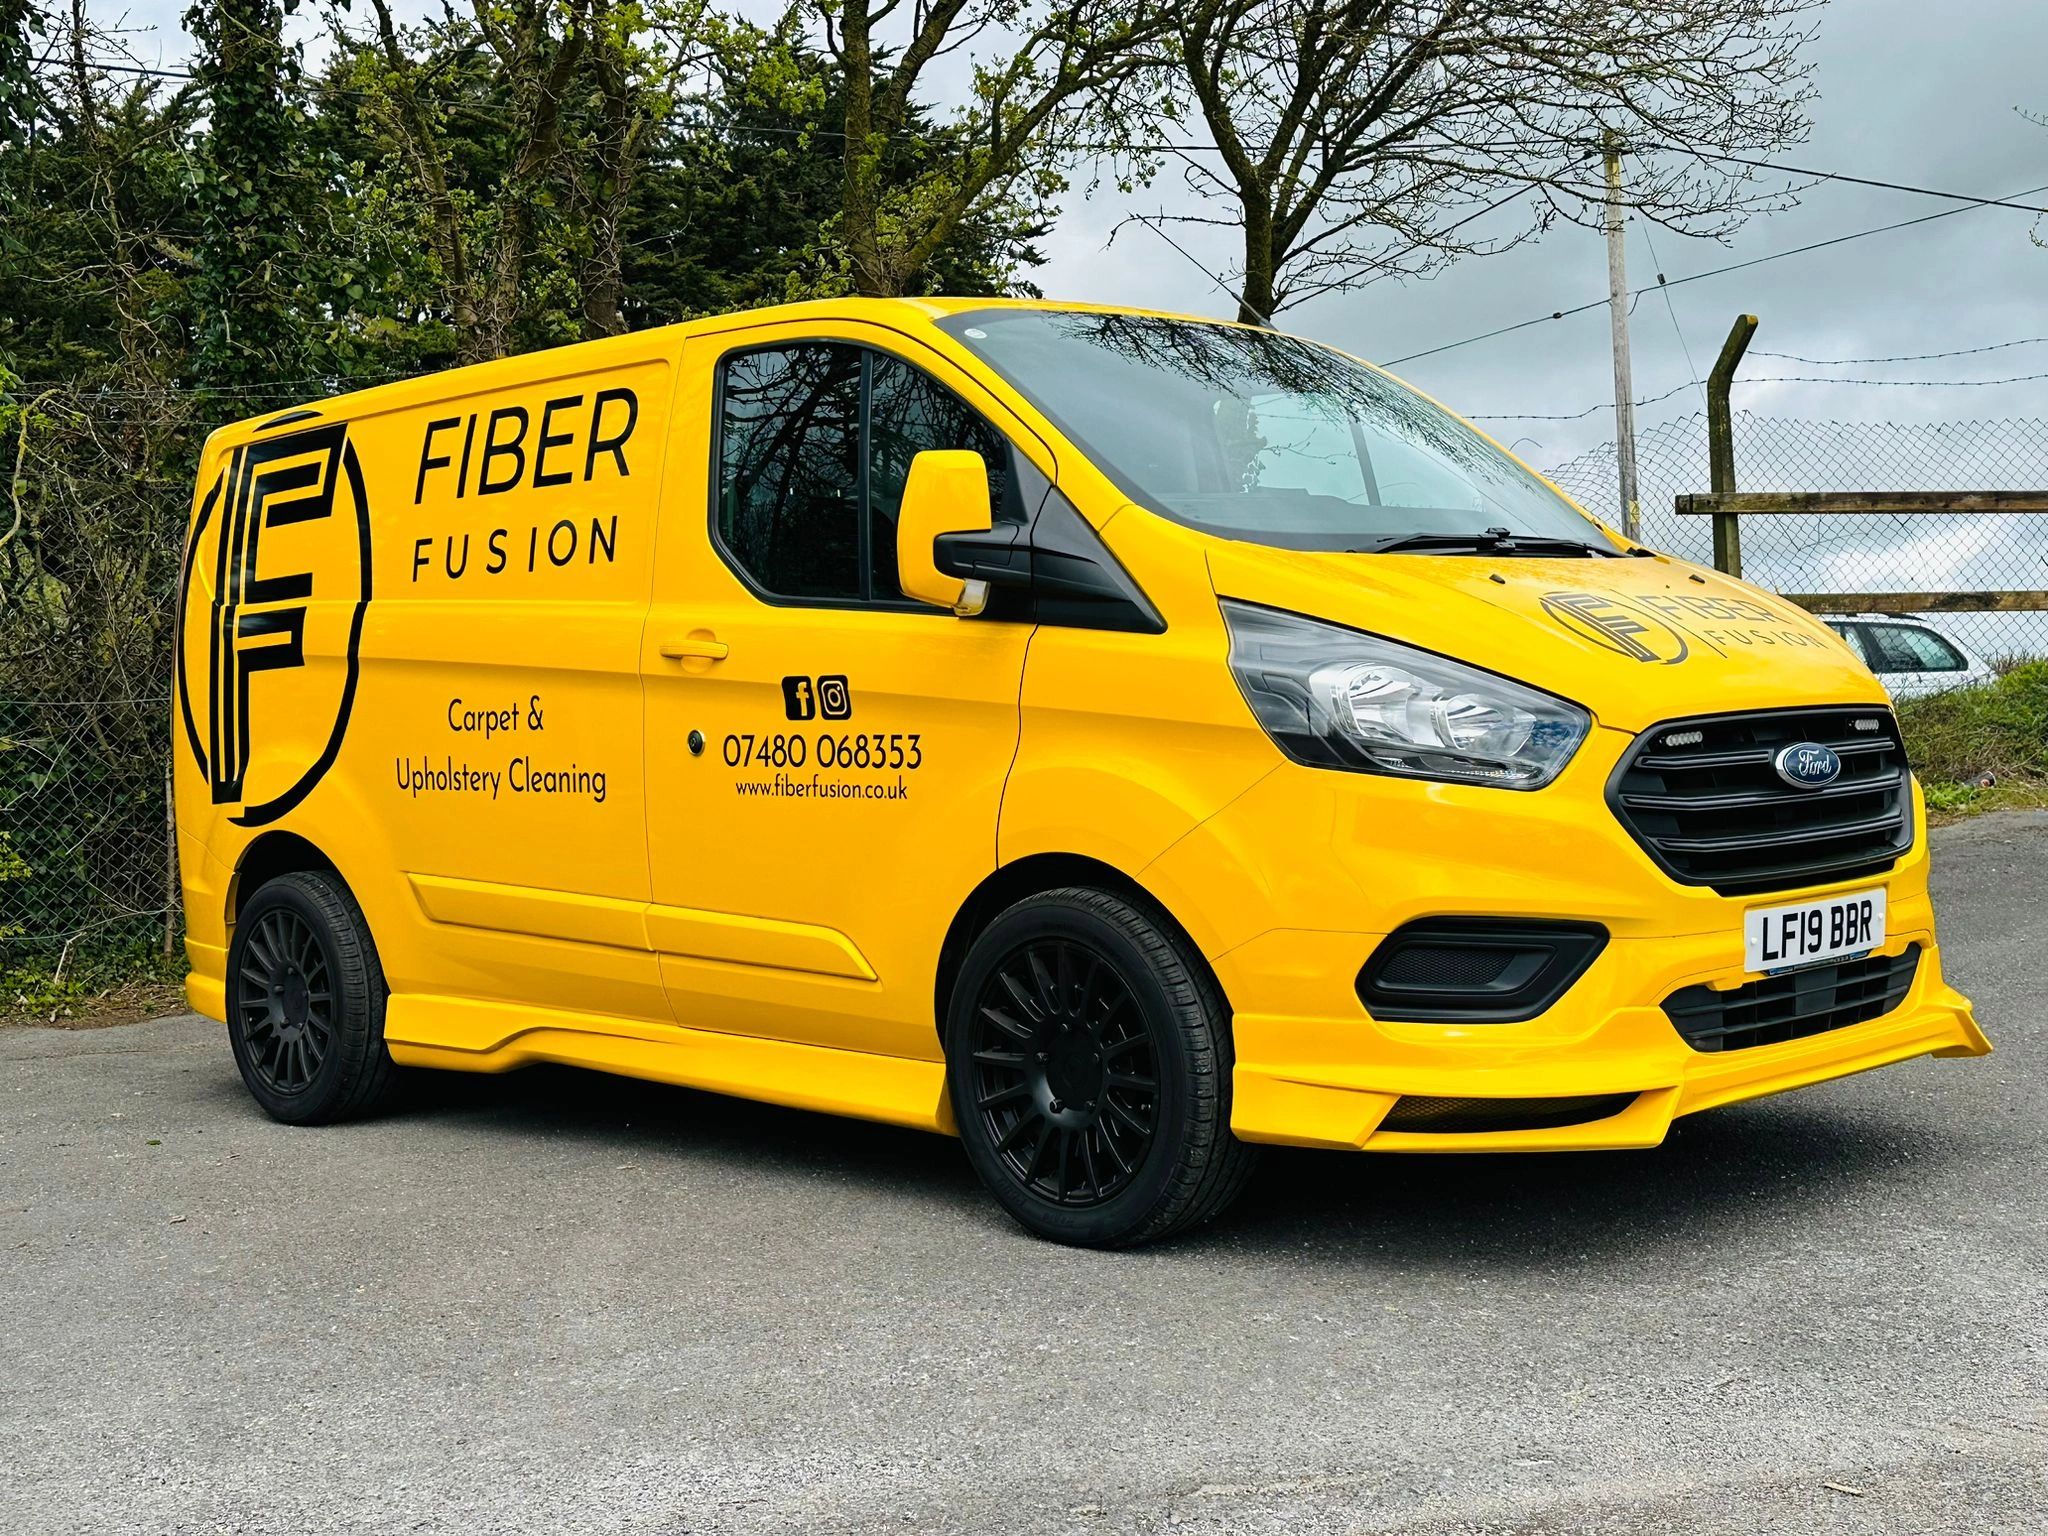 A picture of Fiber Fusion van with livery advertising carpet & upholstery cleaning